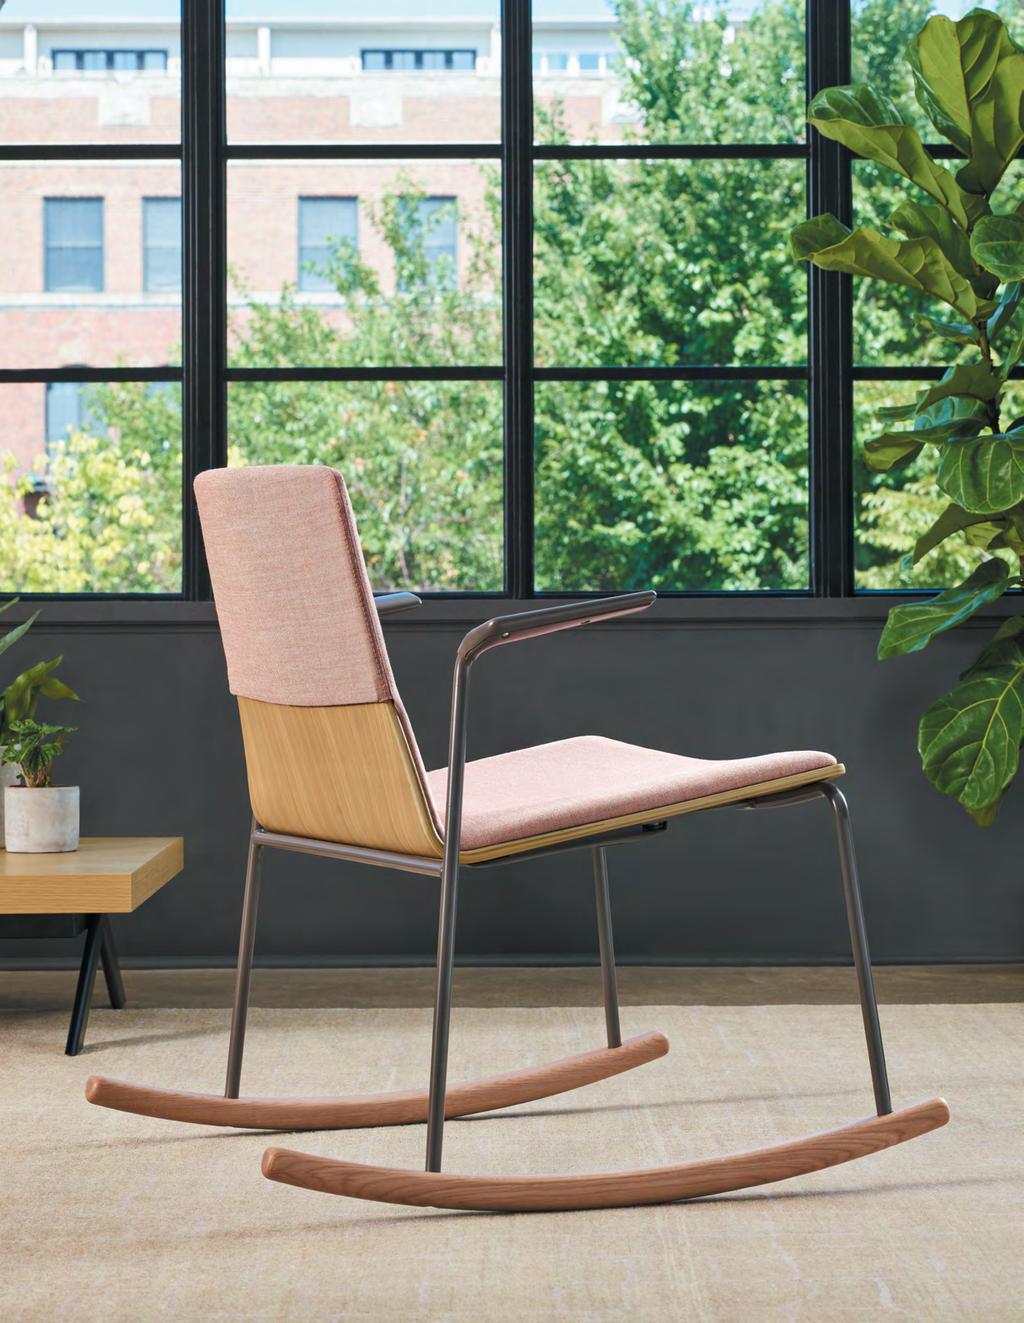 Seating in motion. Rockers are naturally filled with positive associations of comfort, wellbeing and warmth.